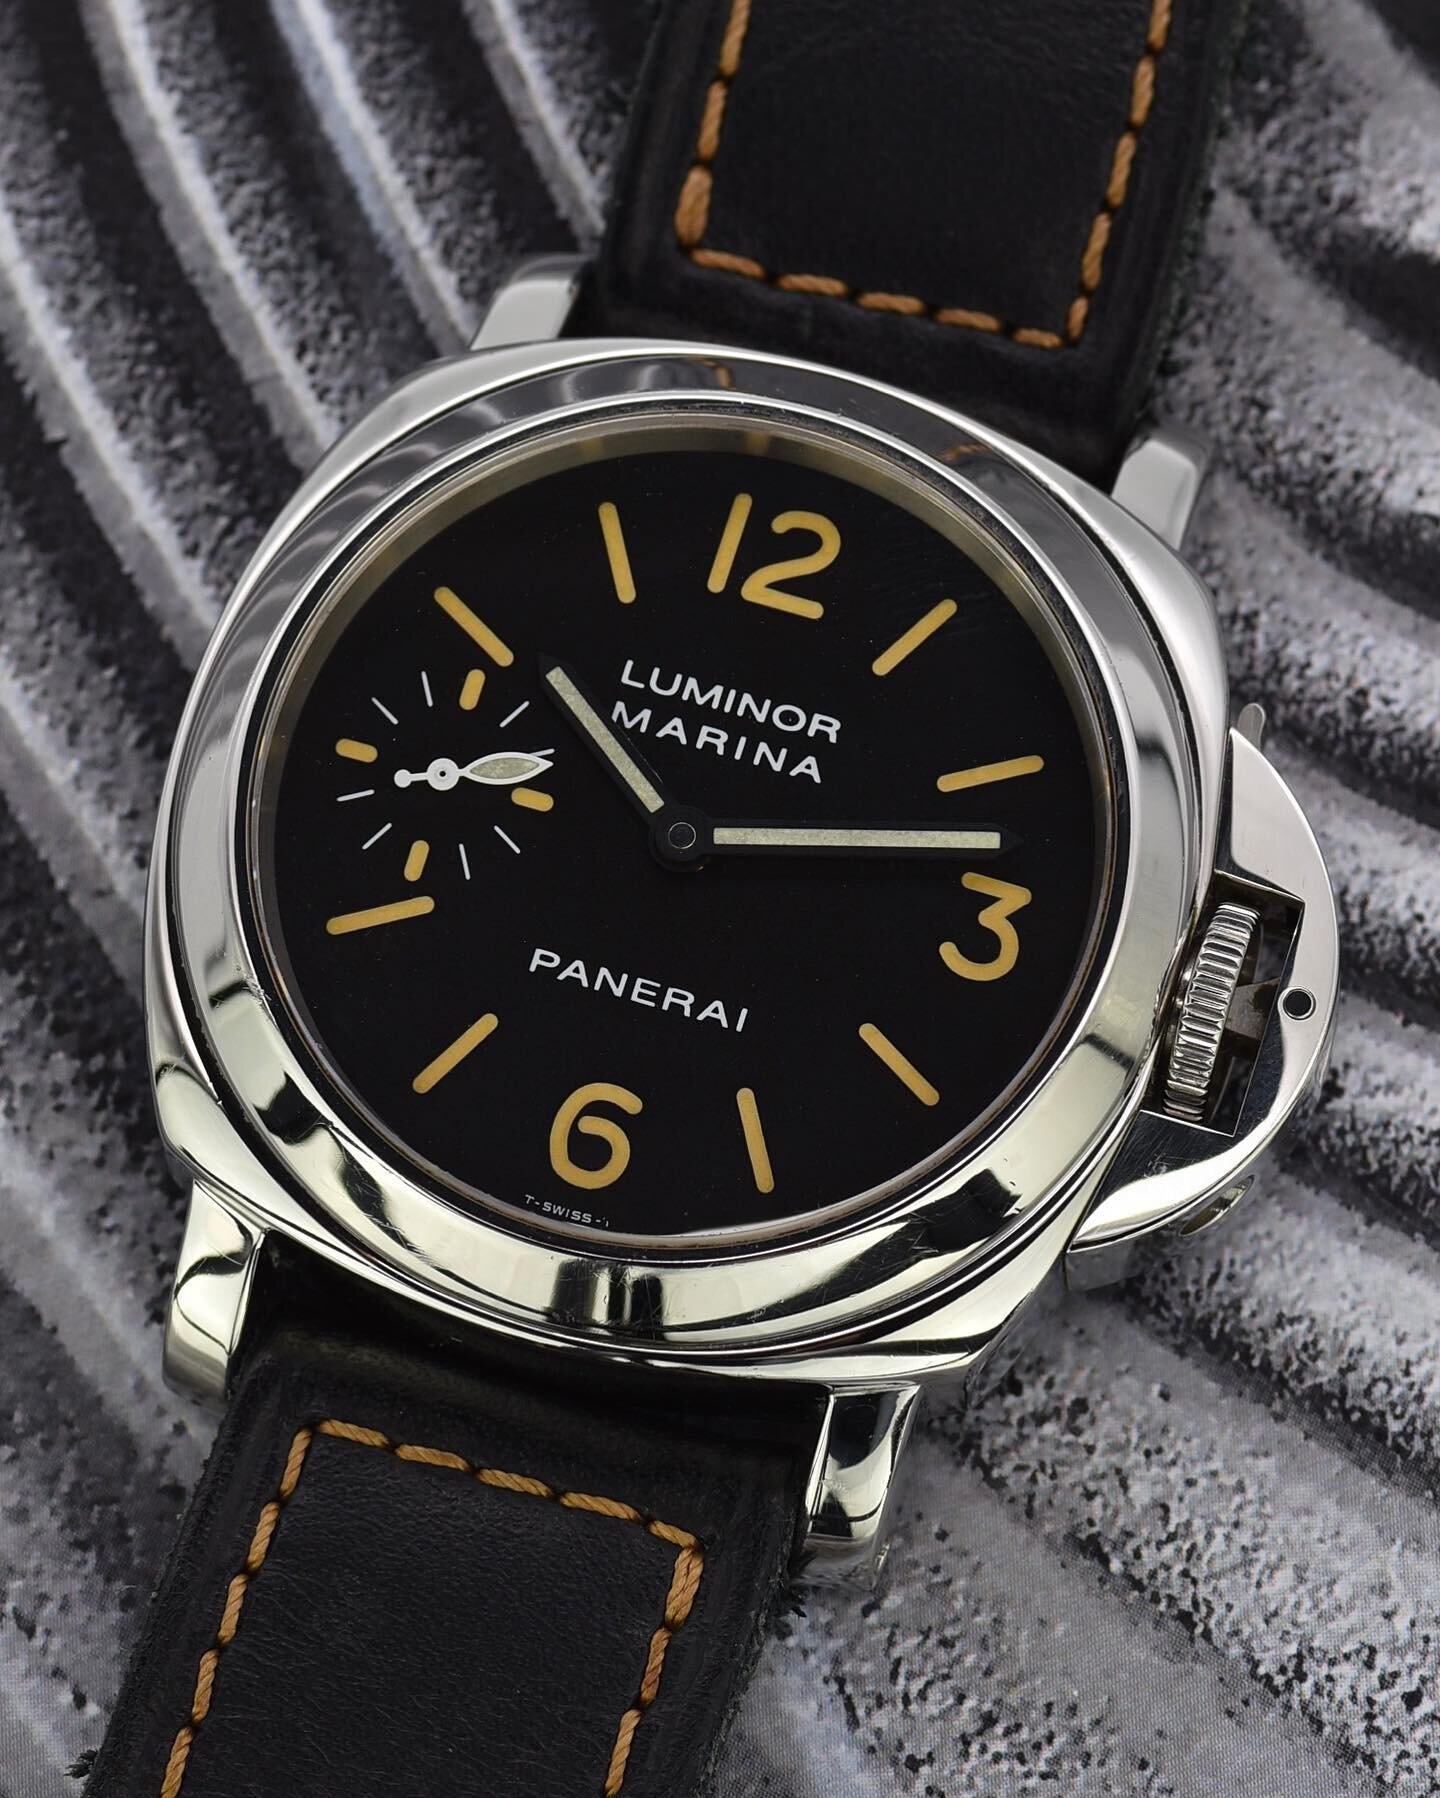 Prior to the Panerai A &amp; B Series in 1998, Panerai released a small series of watches to test the waters and generate media attention following the Vend&ocirc;me acquisition. 
Pictured is one of these models, the Panerai Luminor PreA 01 in a 6502